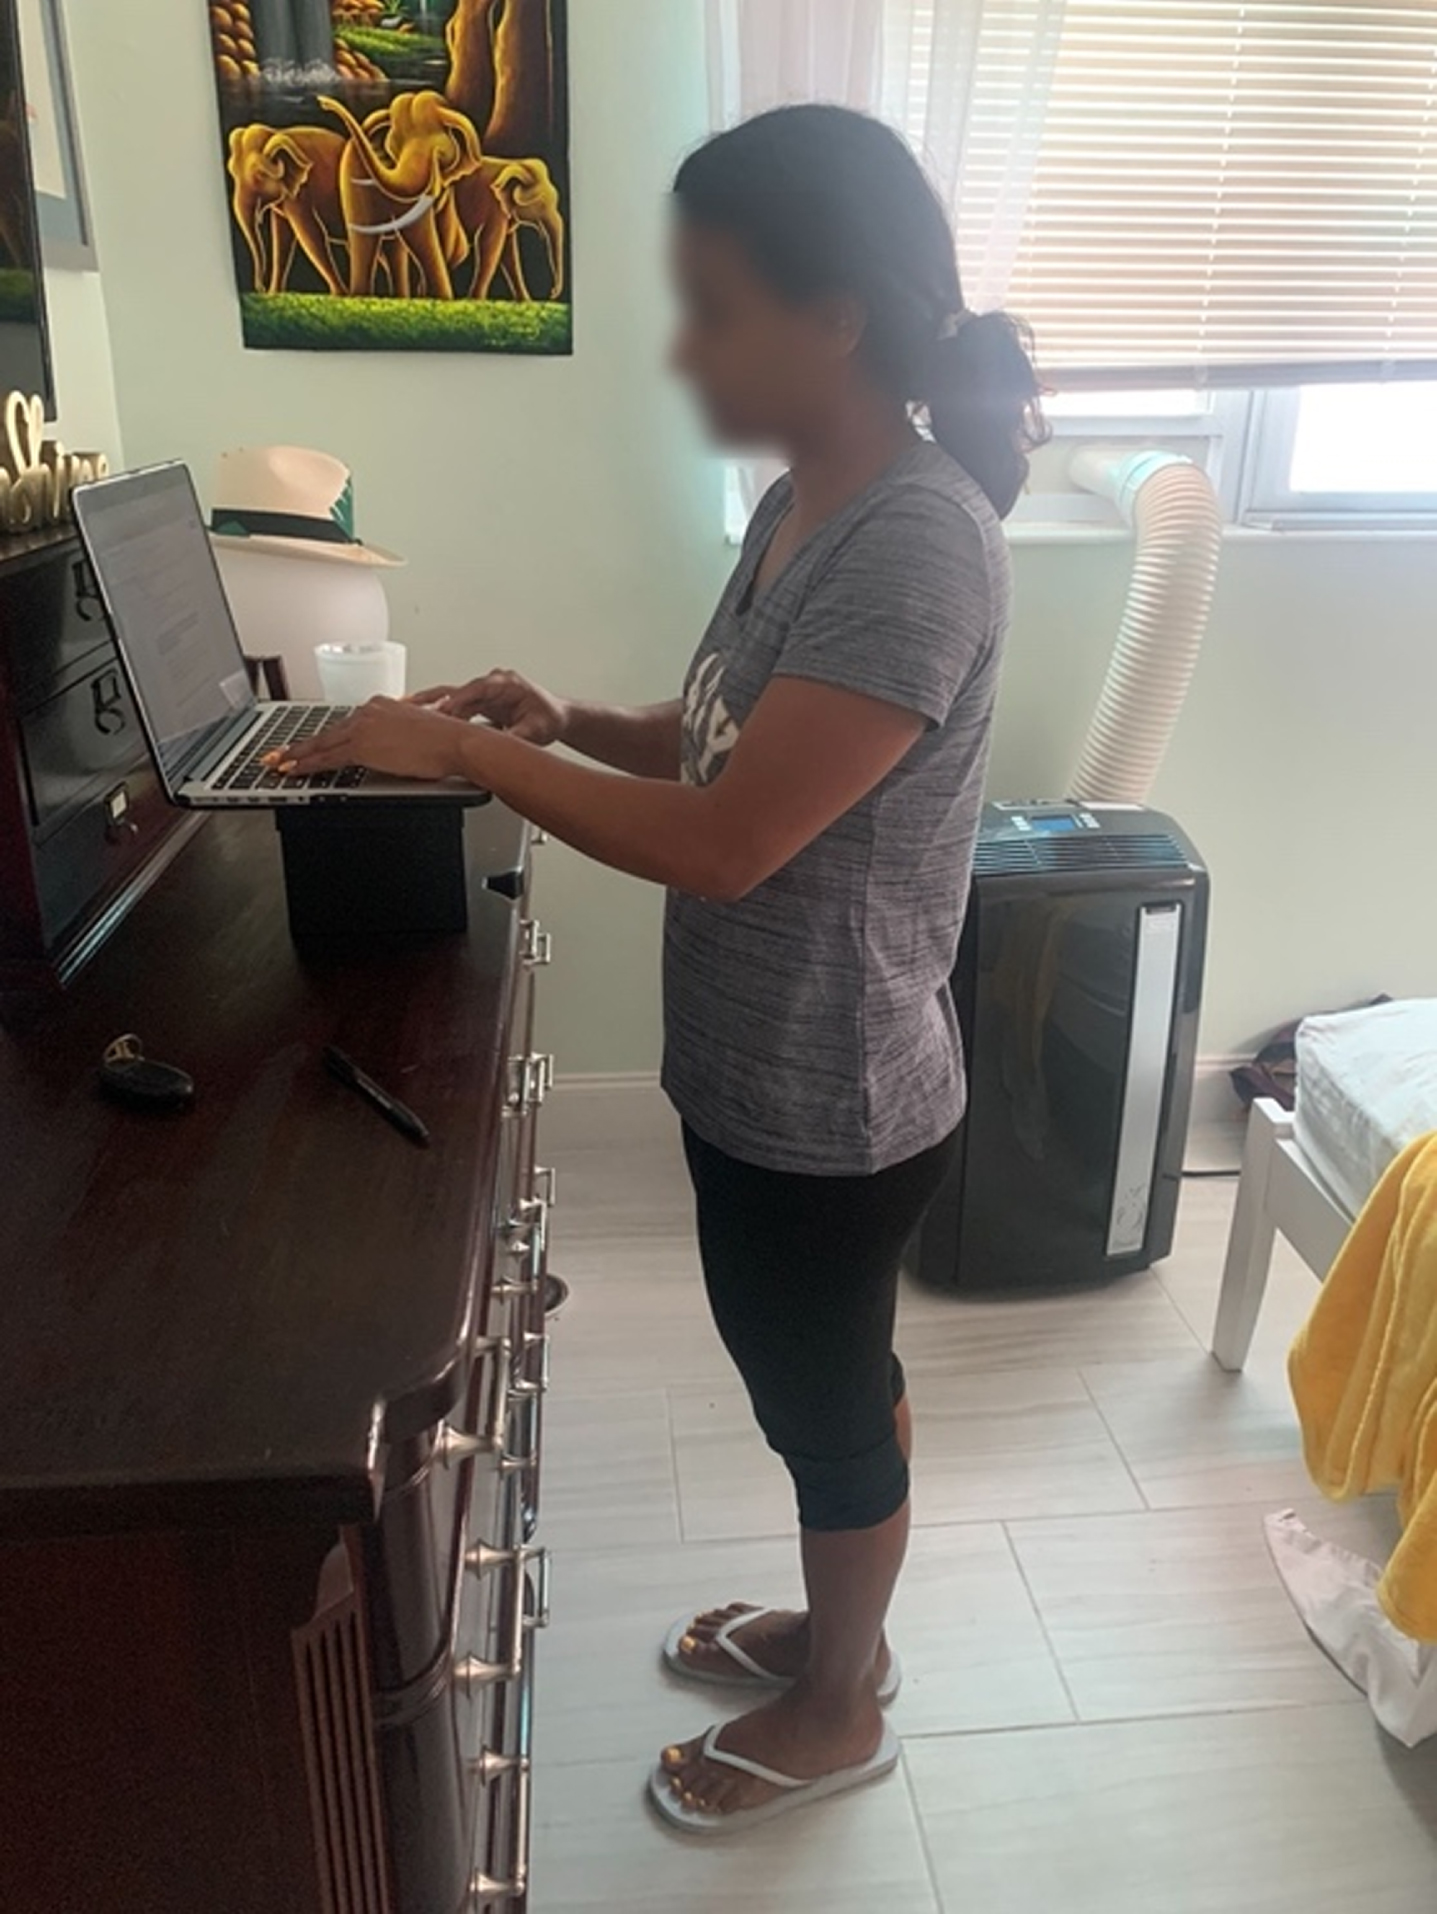 A participant used home objects to create a standing desk in her rotation of workstations.